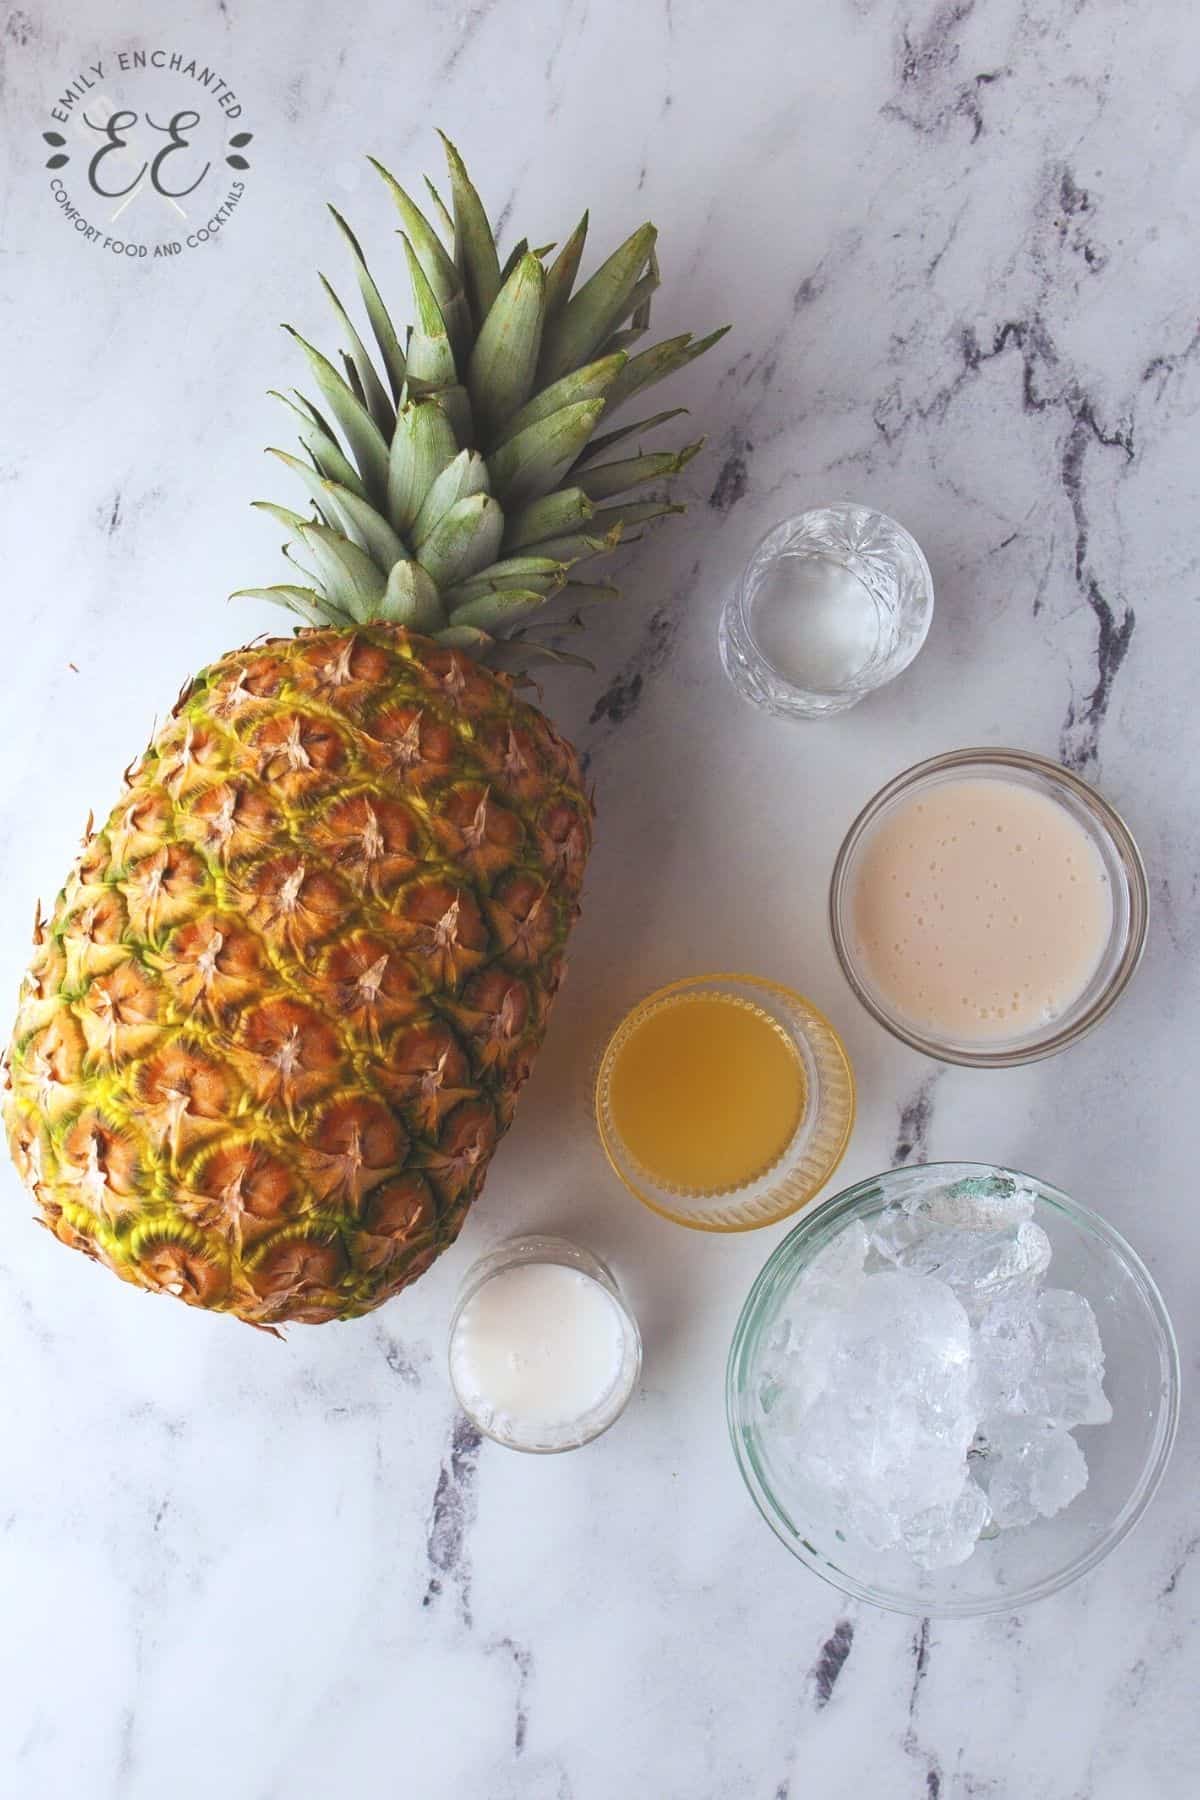 Frozen Piña Colada ingredients in a flat lay on marble surface